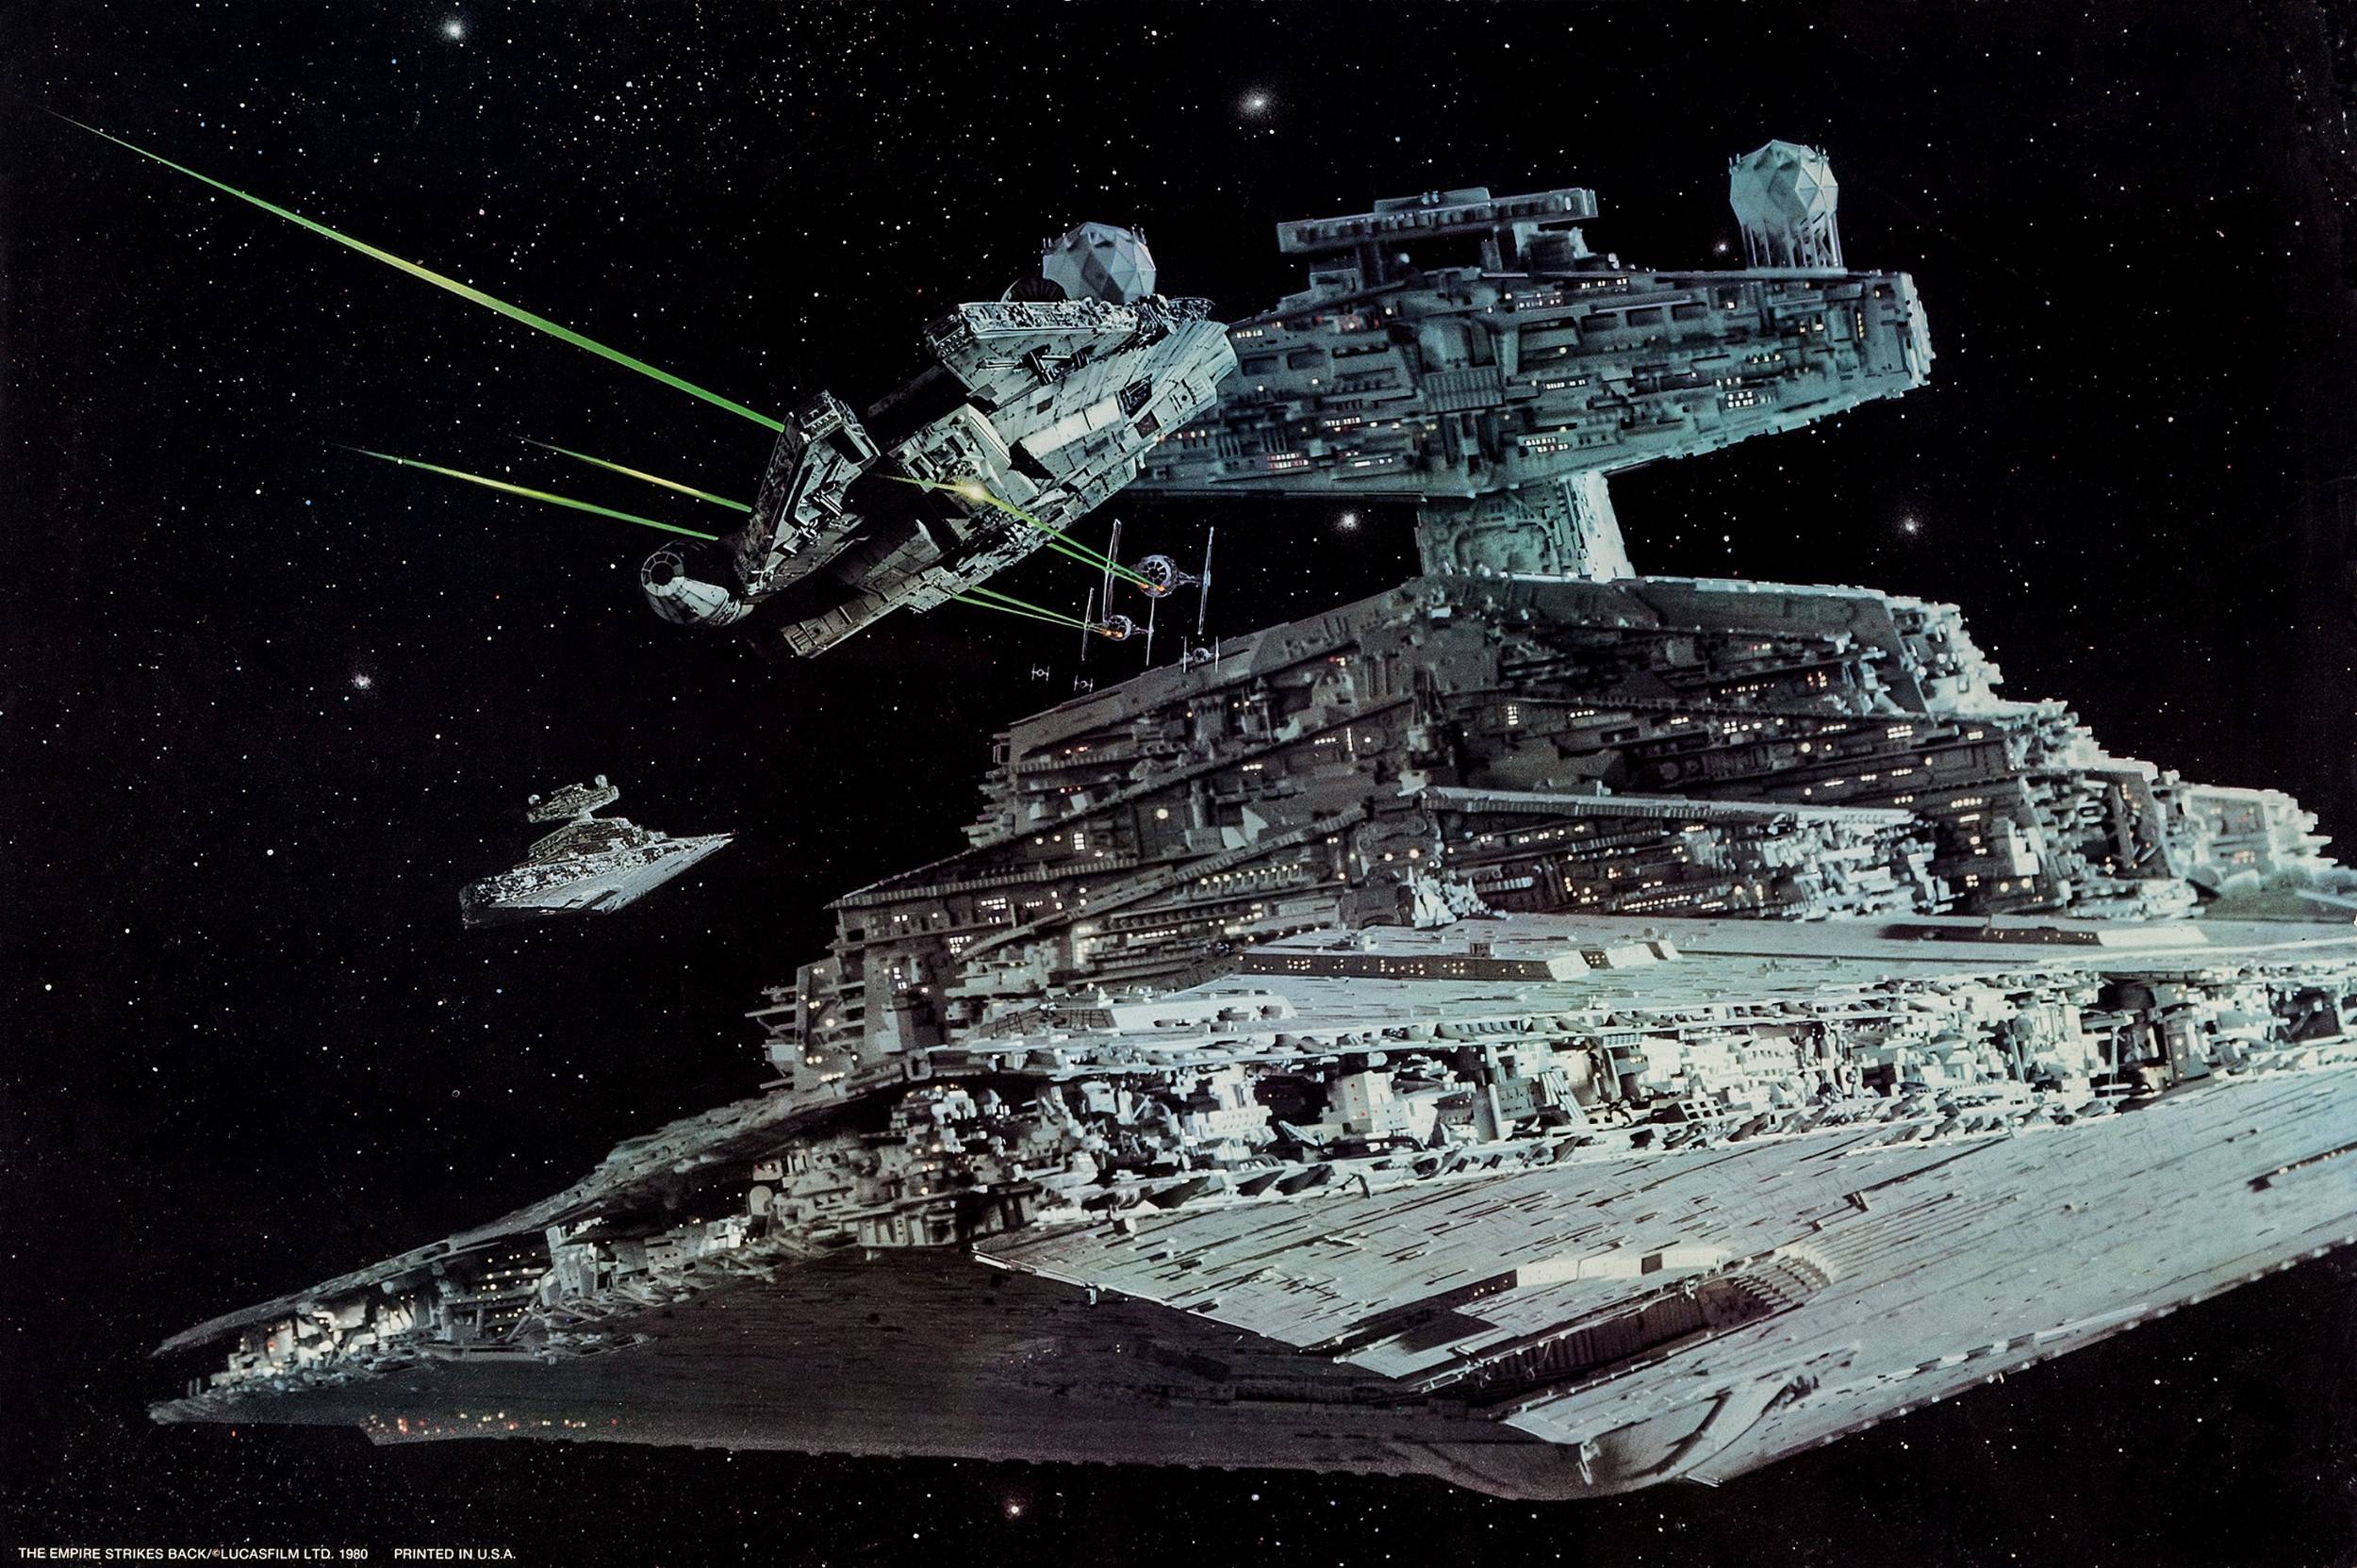 Classic image of the Millennium Falcon, Star Destroyers, and Tie